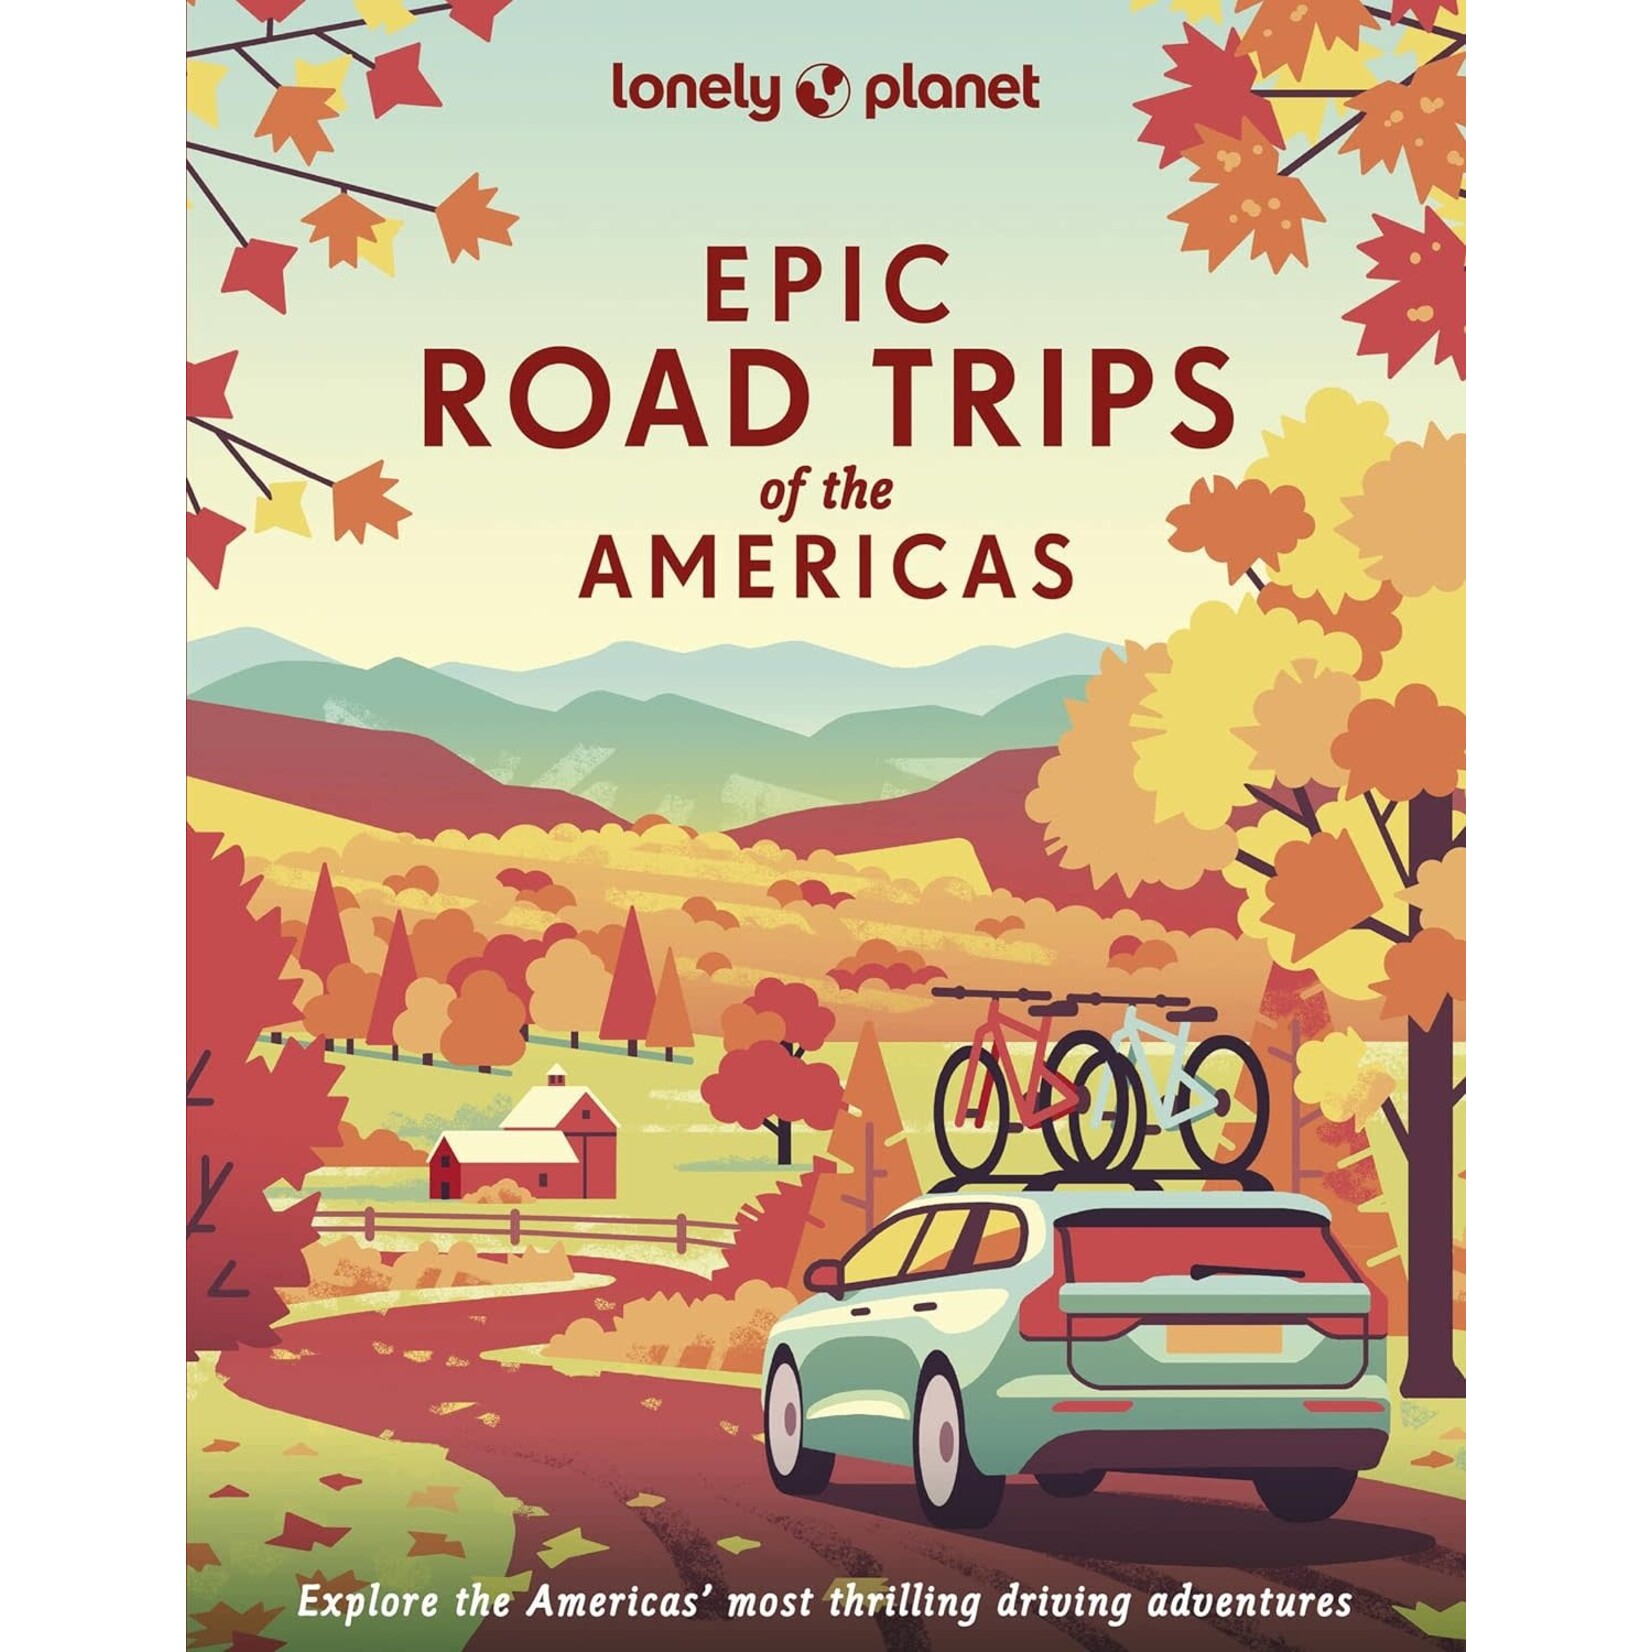 Lonely Planet: Epic Road Trips of the Americas